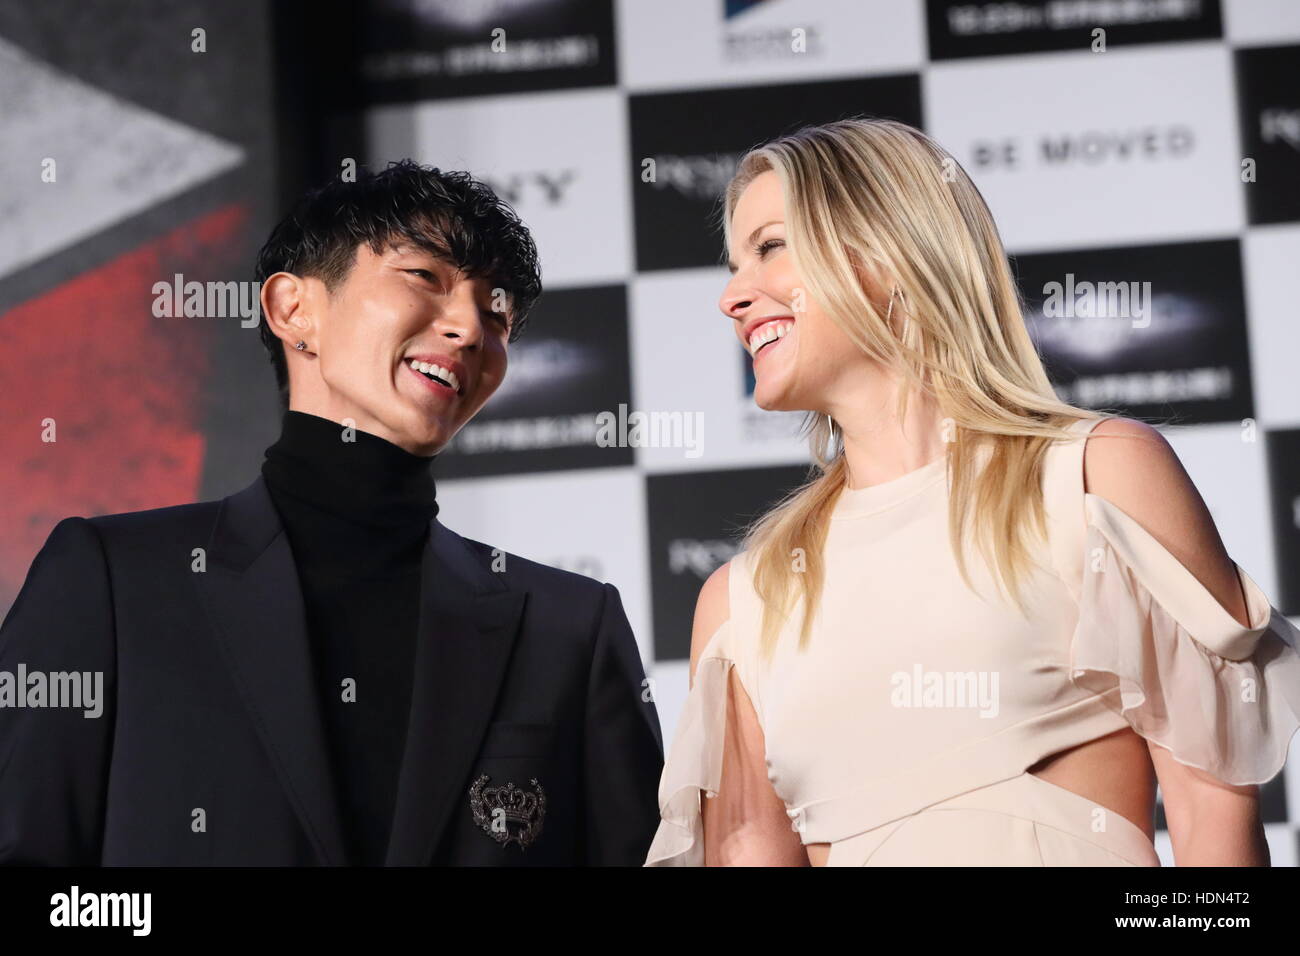 Tokyo, Japan. 13th Dec, 2016. Actor Lee Joon-gi and actress Ali Larter  attend the world premiere of the film Resident Evil: The Final Chapter in  Tokyo, Japan on December 13, 2016. Credit